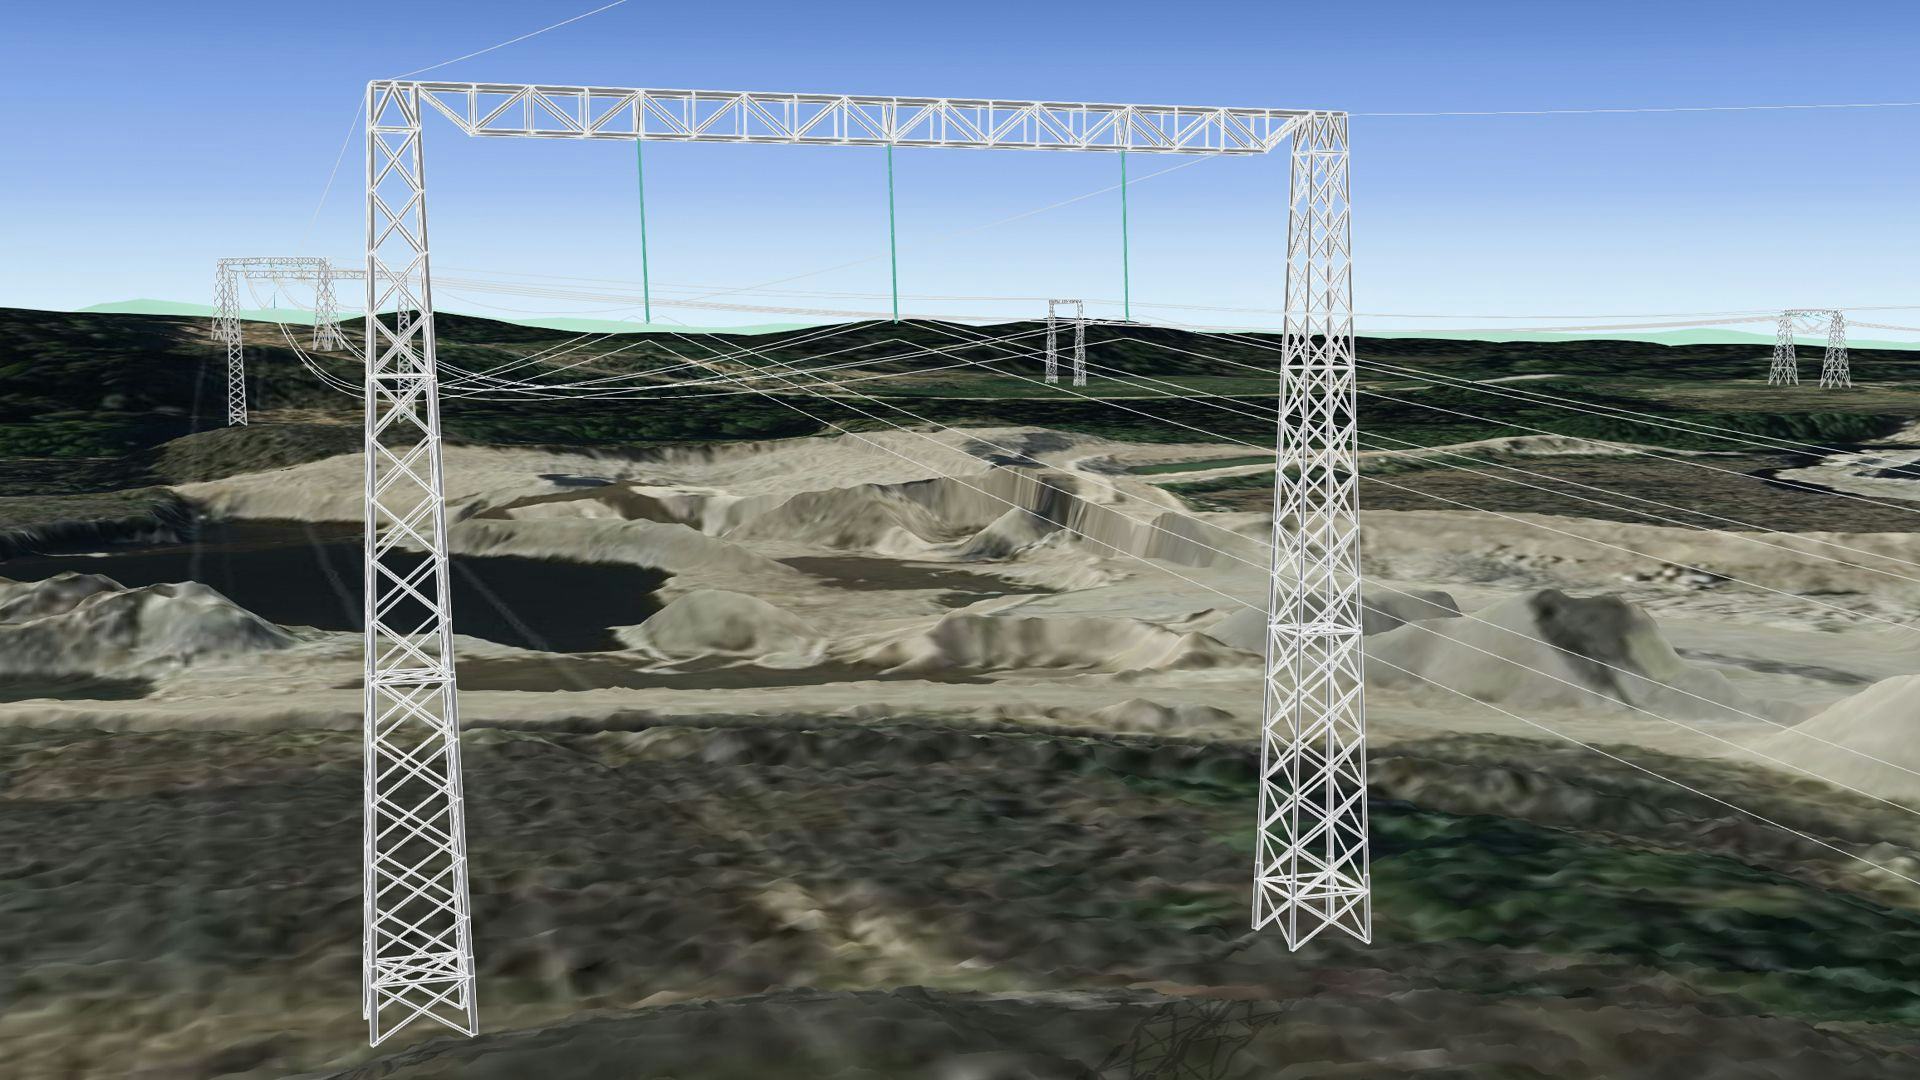 3D model of electrical tower structure over a rugged terrain